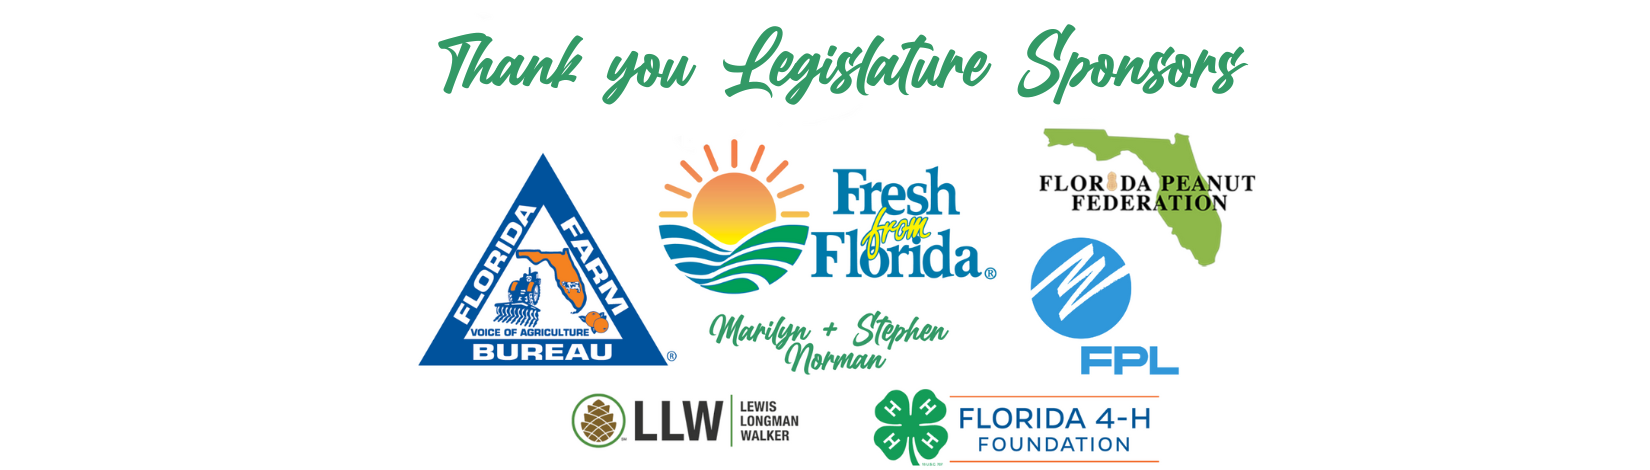 Thank You to 50th Session Sponsors: Florida Farm Bureau, Fresh From Florida, Marilyn and Stephen Norman, Florida Peanut Federation, LLW (Lewis, Longman, Walker), and Friends of Florida 4-H Foundation